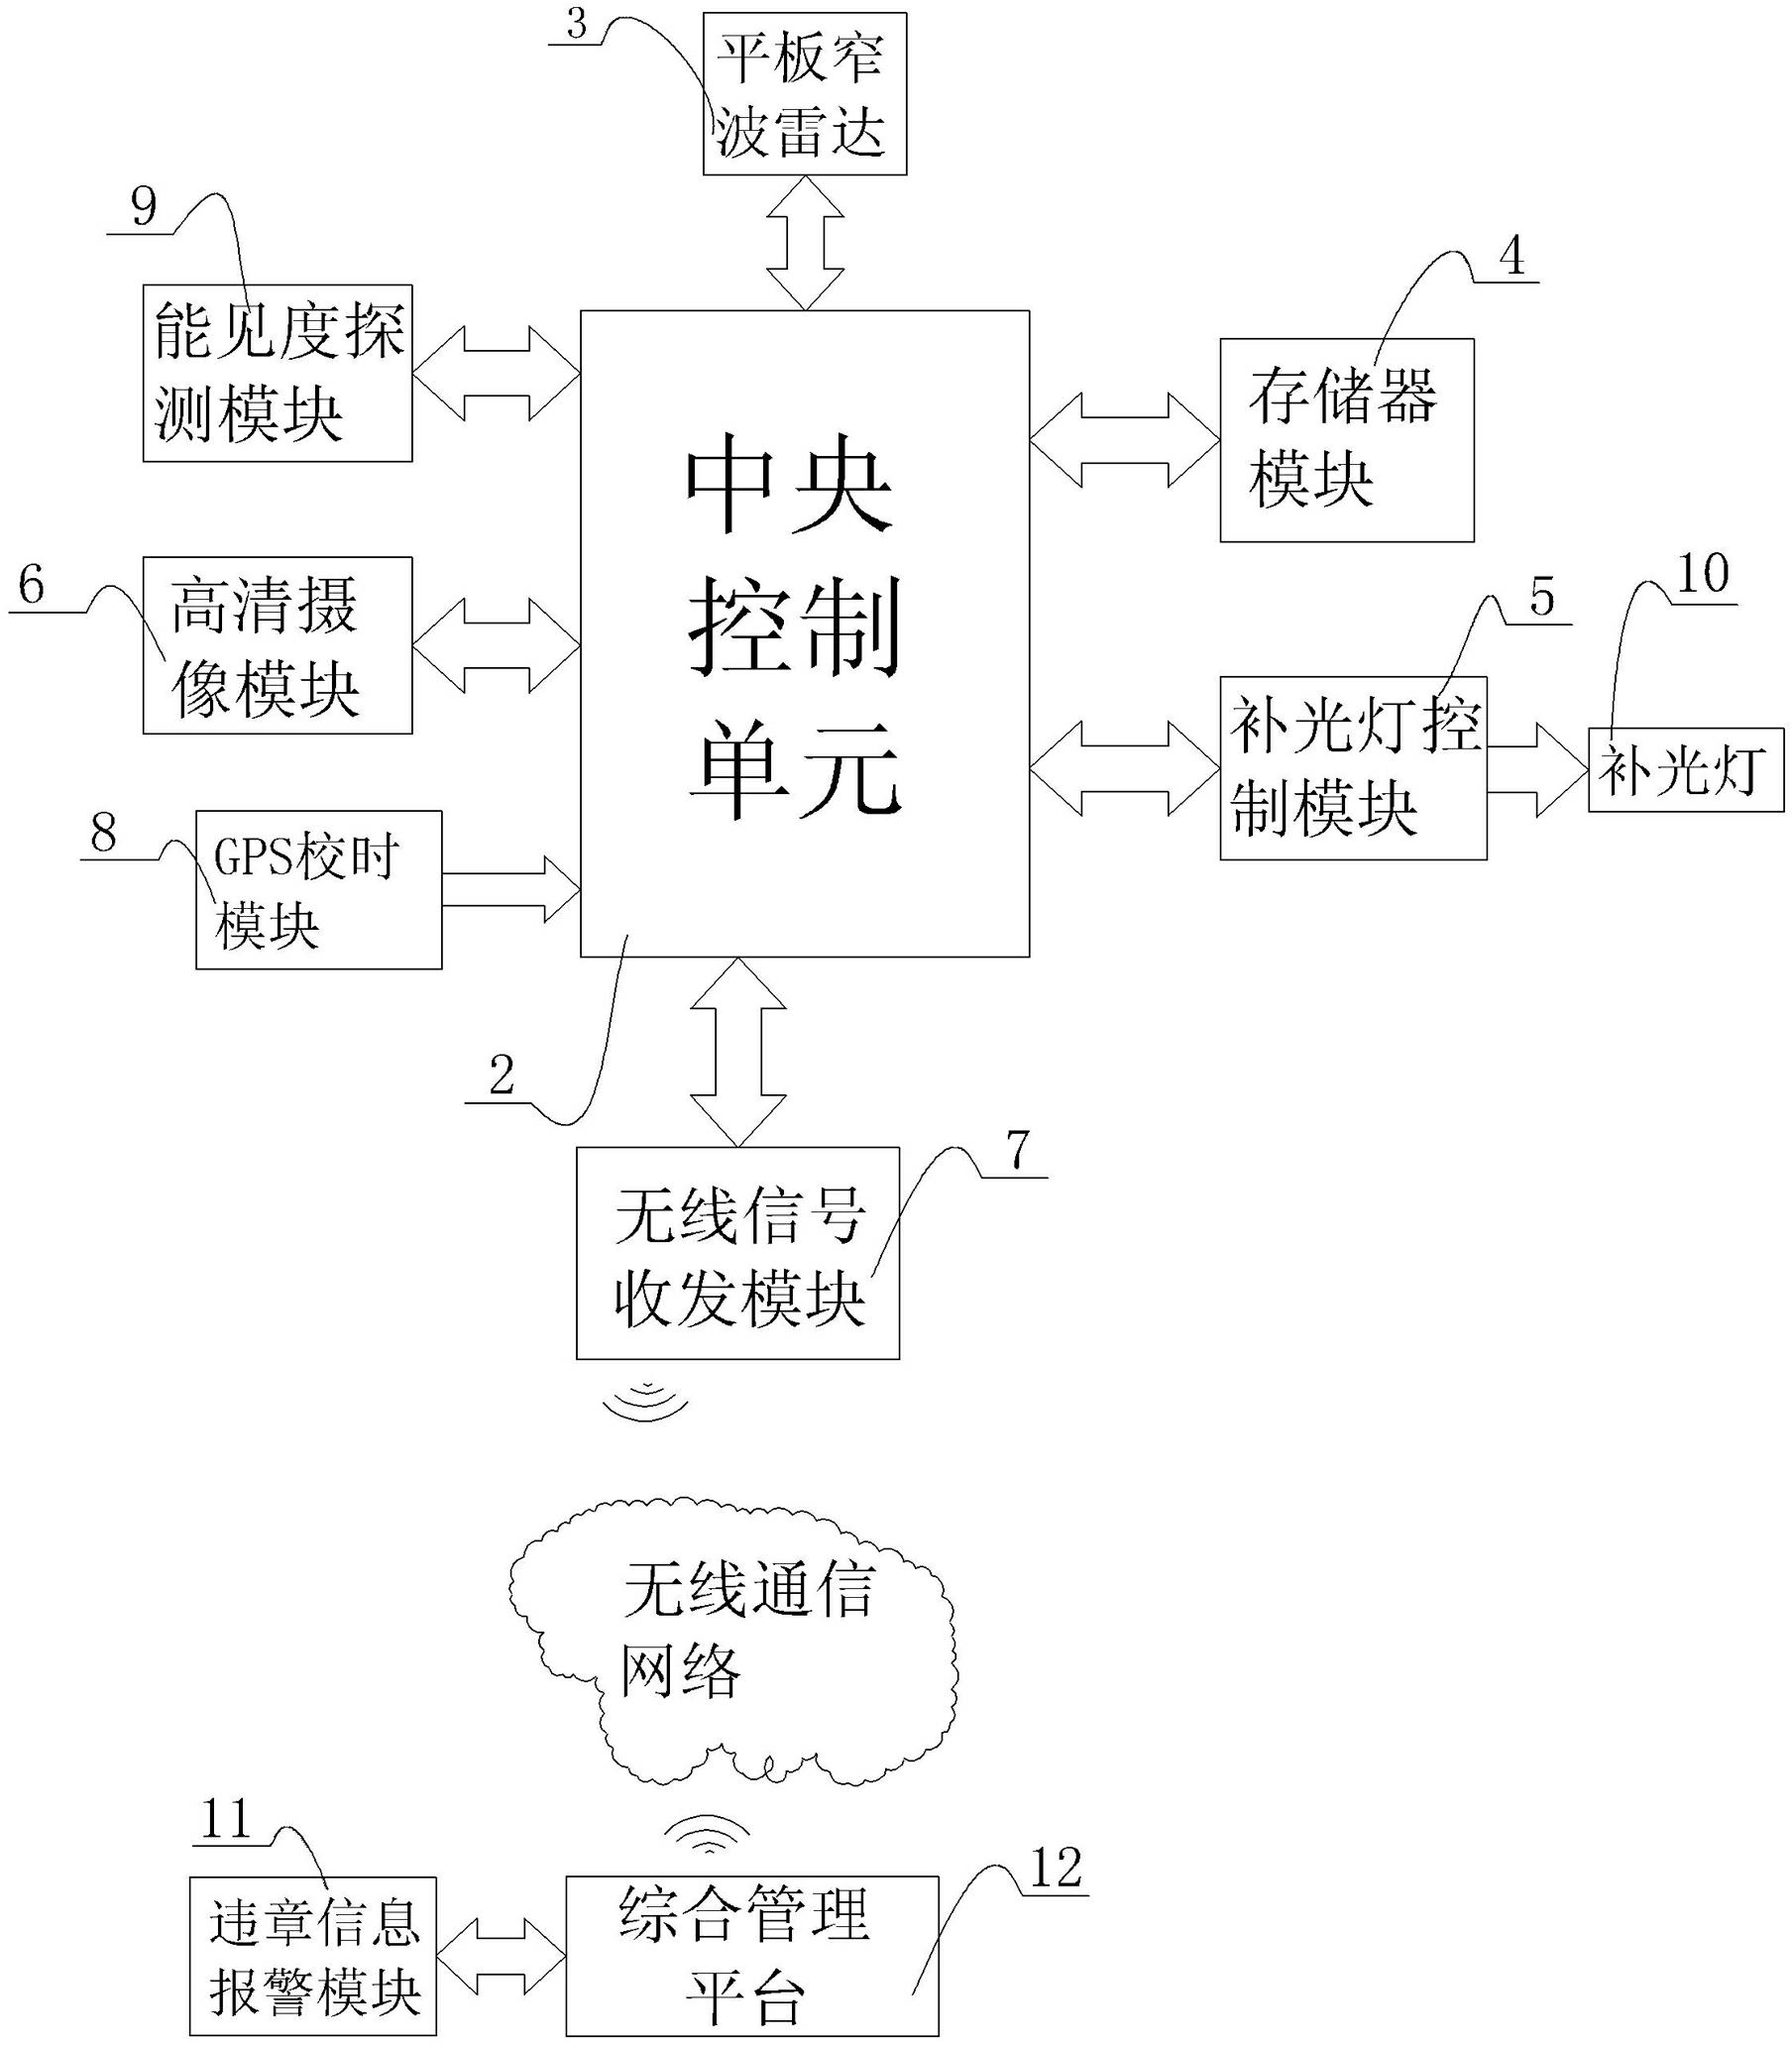 Compound type interval velocity-measuring system based on internet of things technology and method thereof